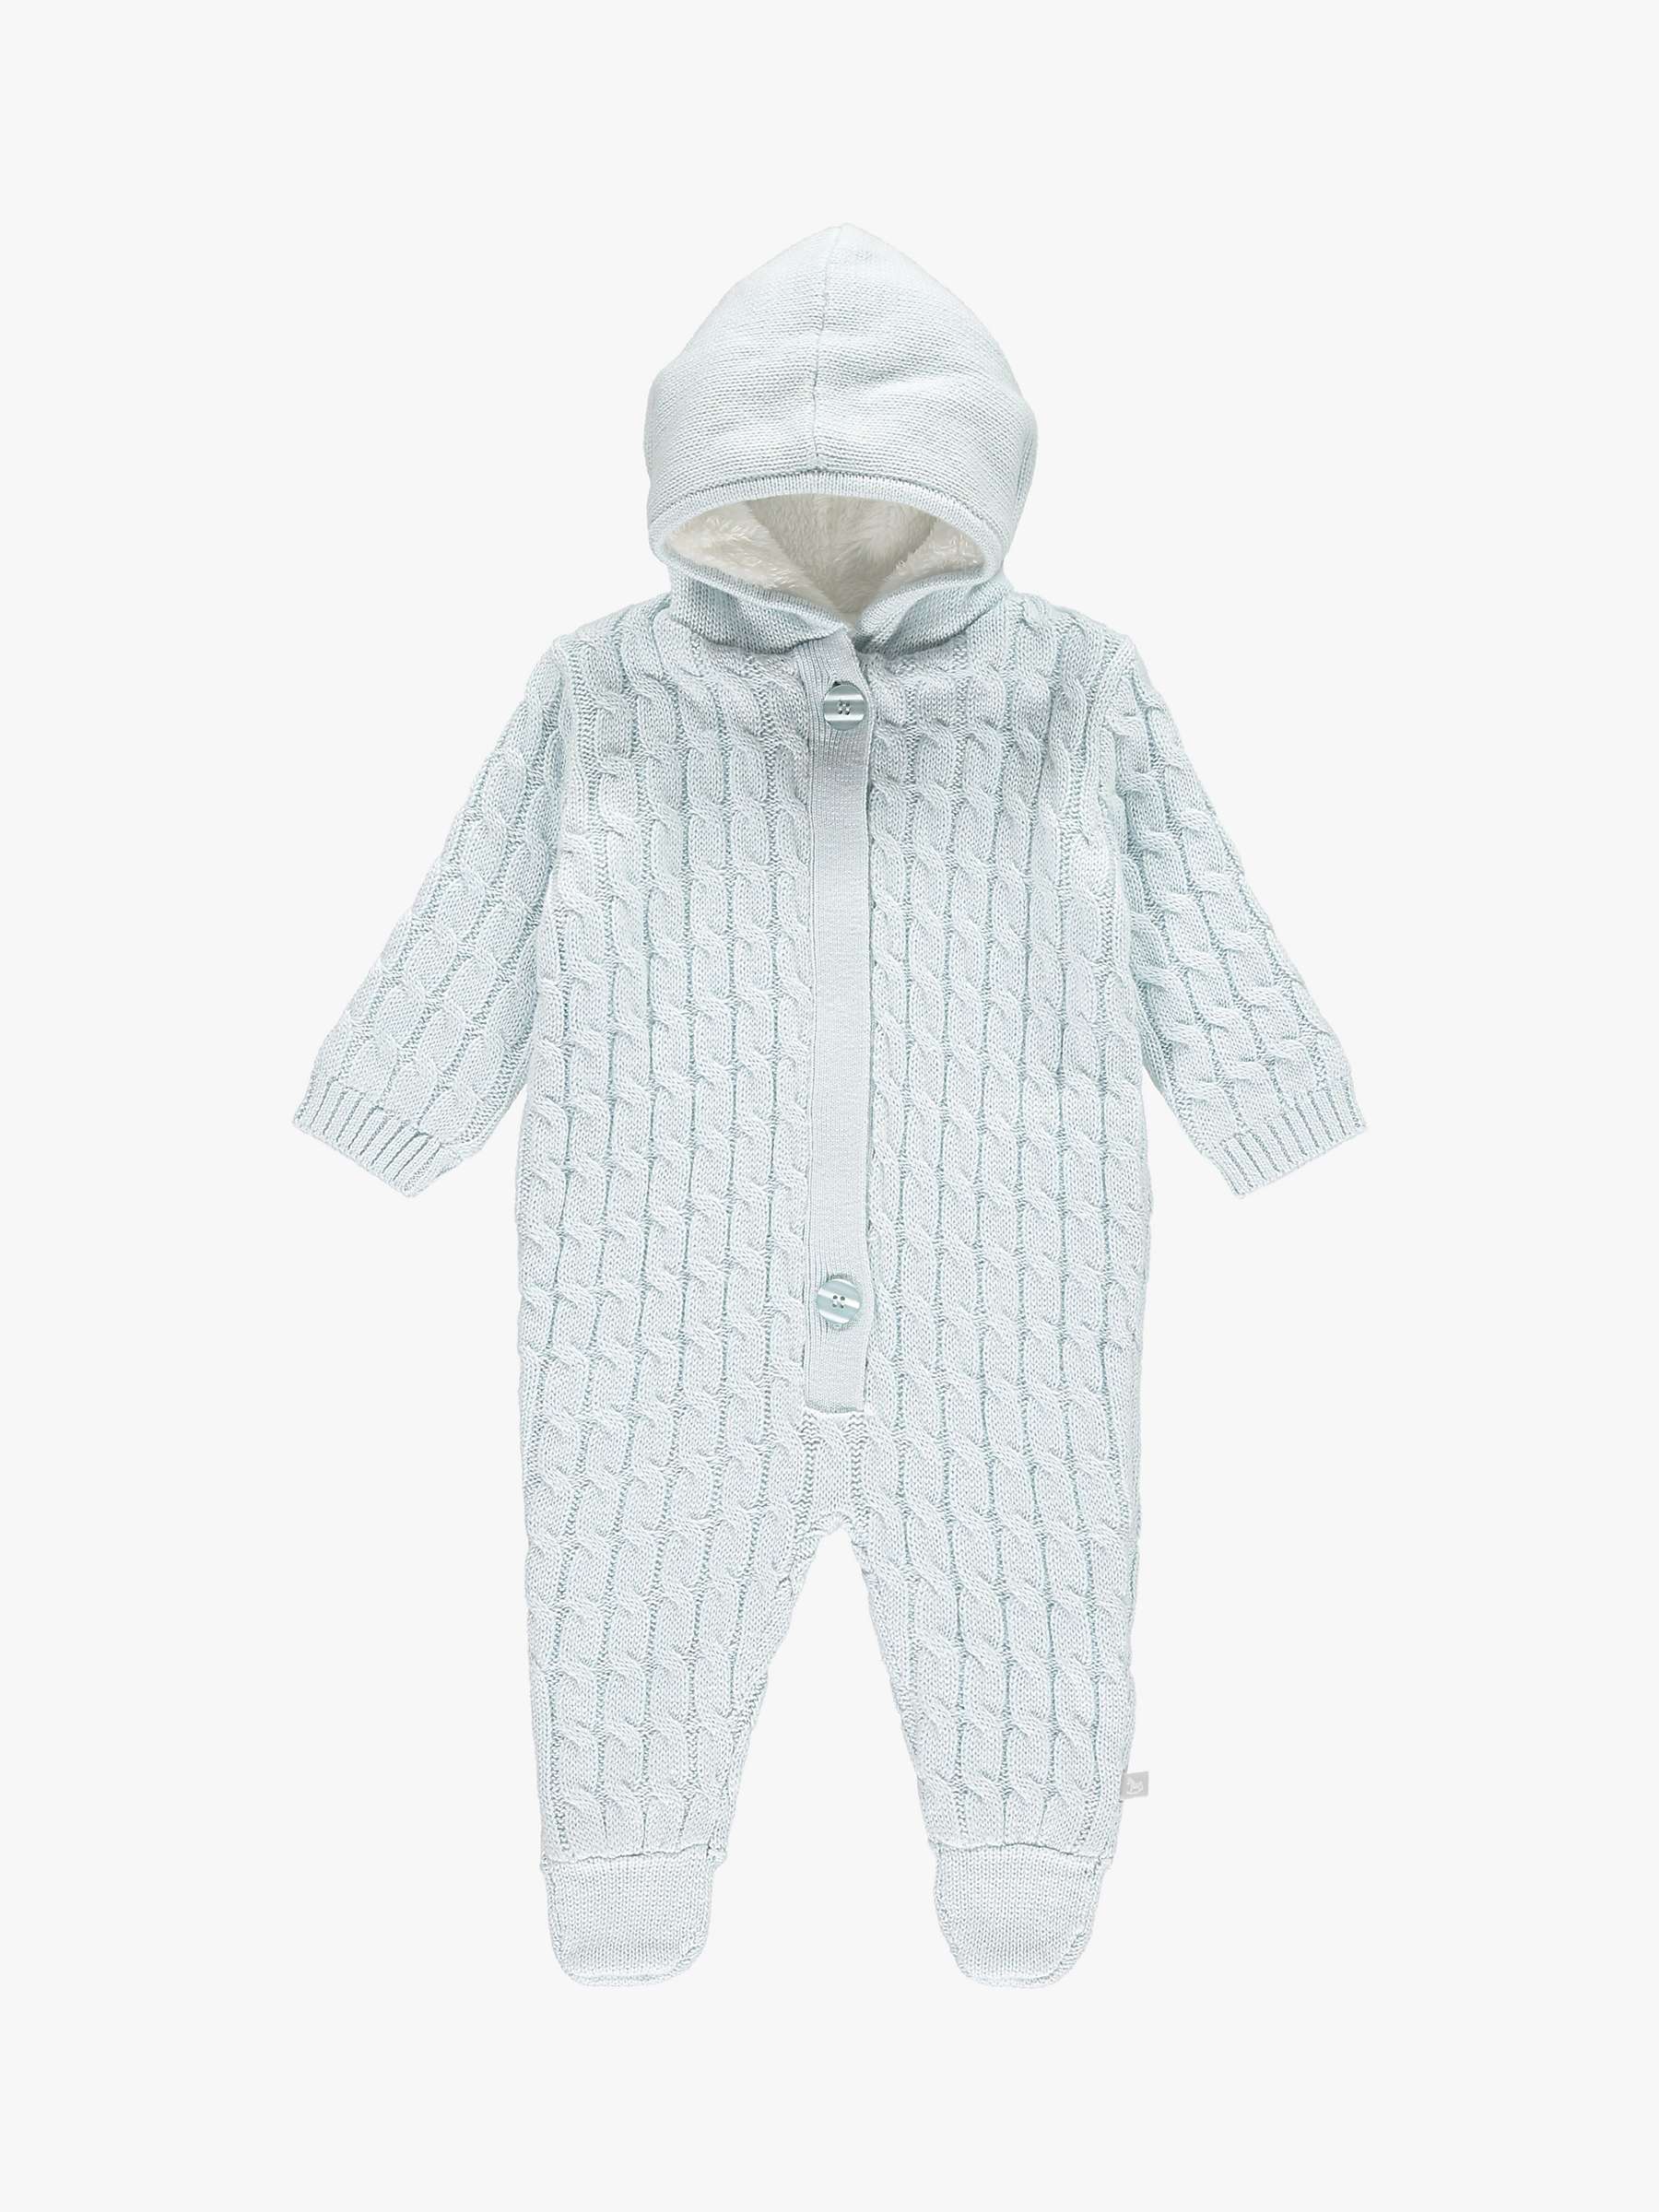 Buy The Little Tailor Baby Knitted Snowsuit Online at johnlewis.com